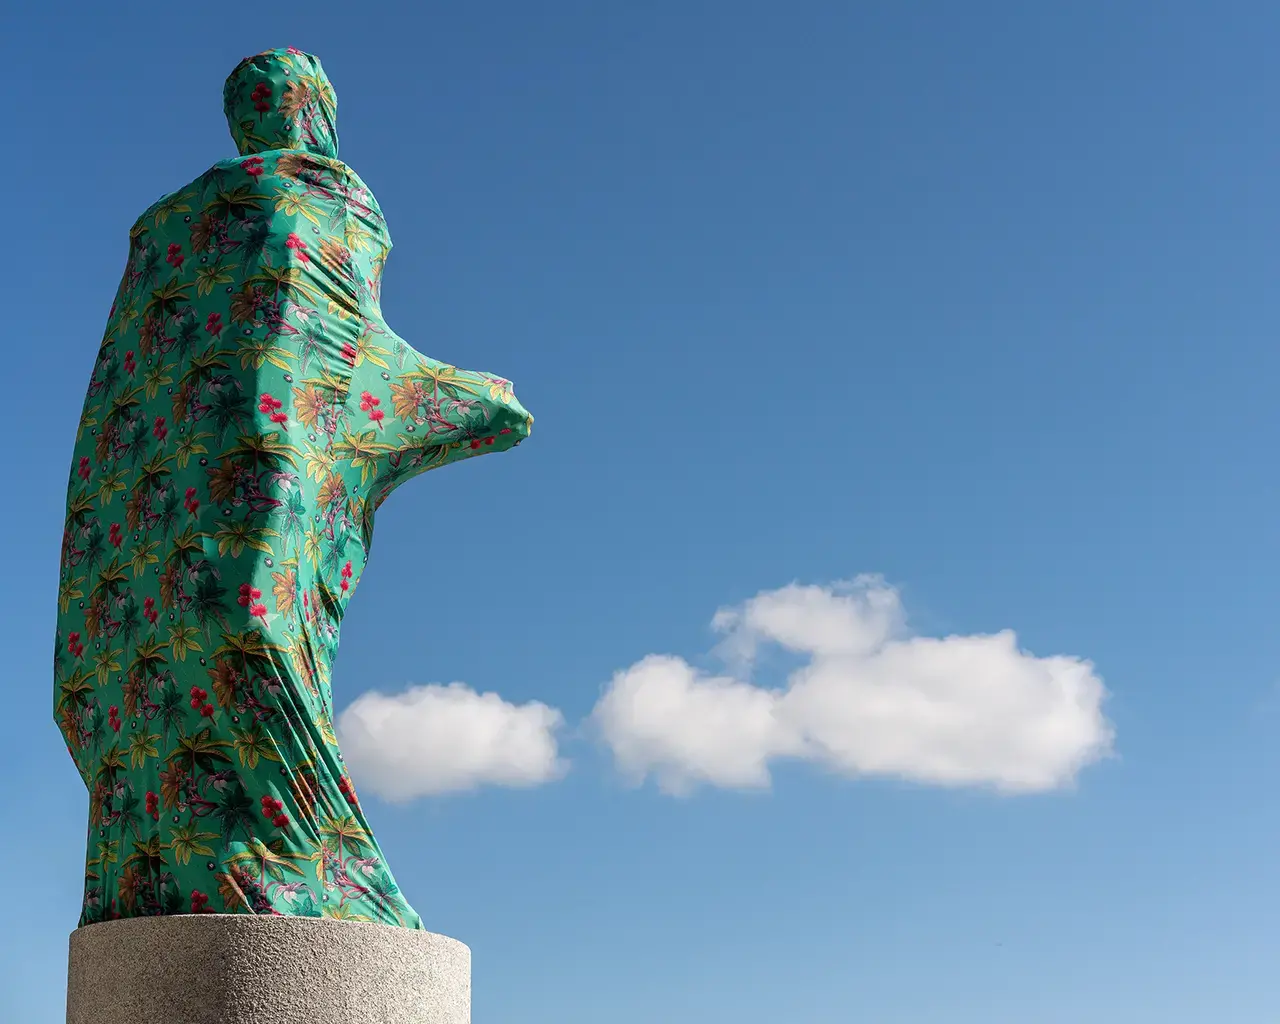 Joiri Minaya, The Cloaking of the statue of Christopher Columbus behind the Bayfront Park Amphitheatre, 2019; dye-sublimation print on spandex fabric and wood structure; Miami, FL. Commissioned by Fringe Projects Miami. Photo by Zachary Balber, courtesy of the artist.